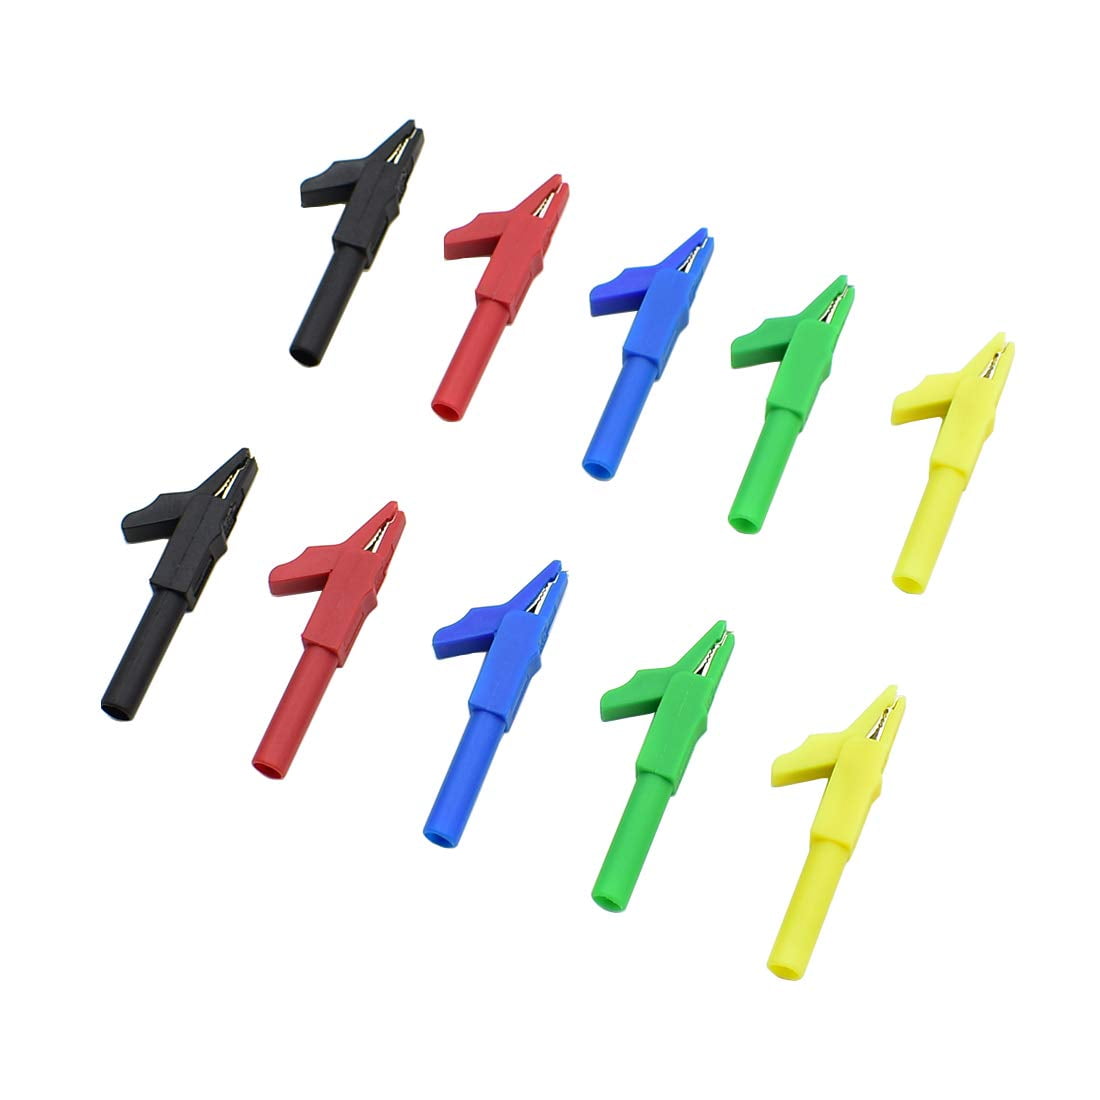 4 Colors Long Jaw Safety Alligator Clip to 4mm Banana Jack Insulated Test Adapte 